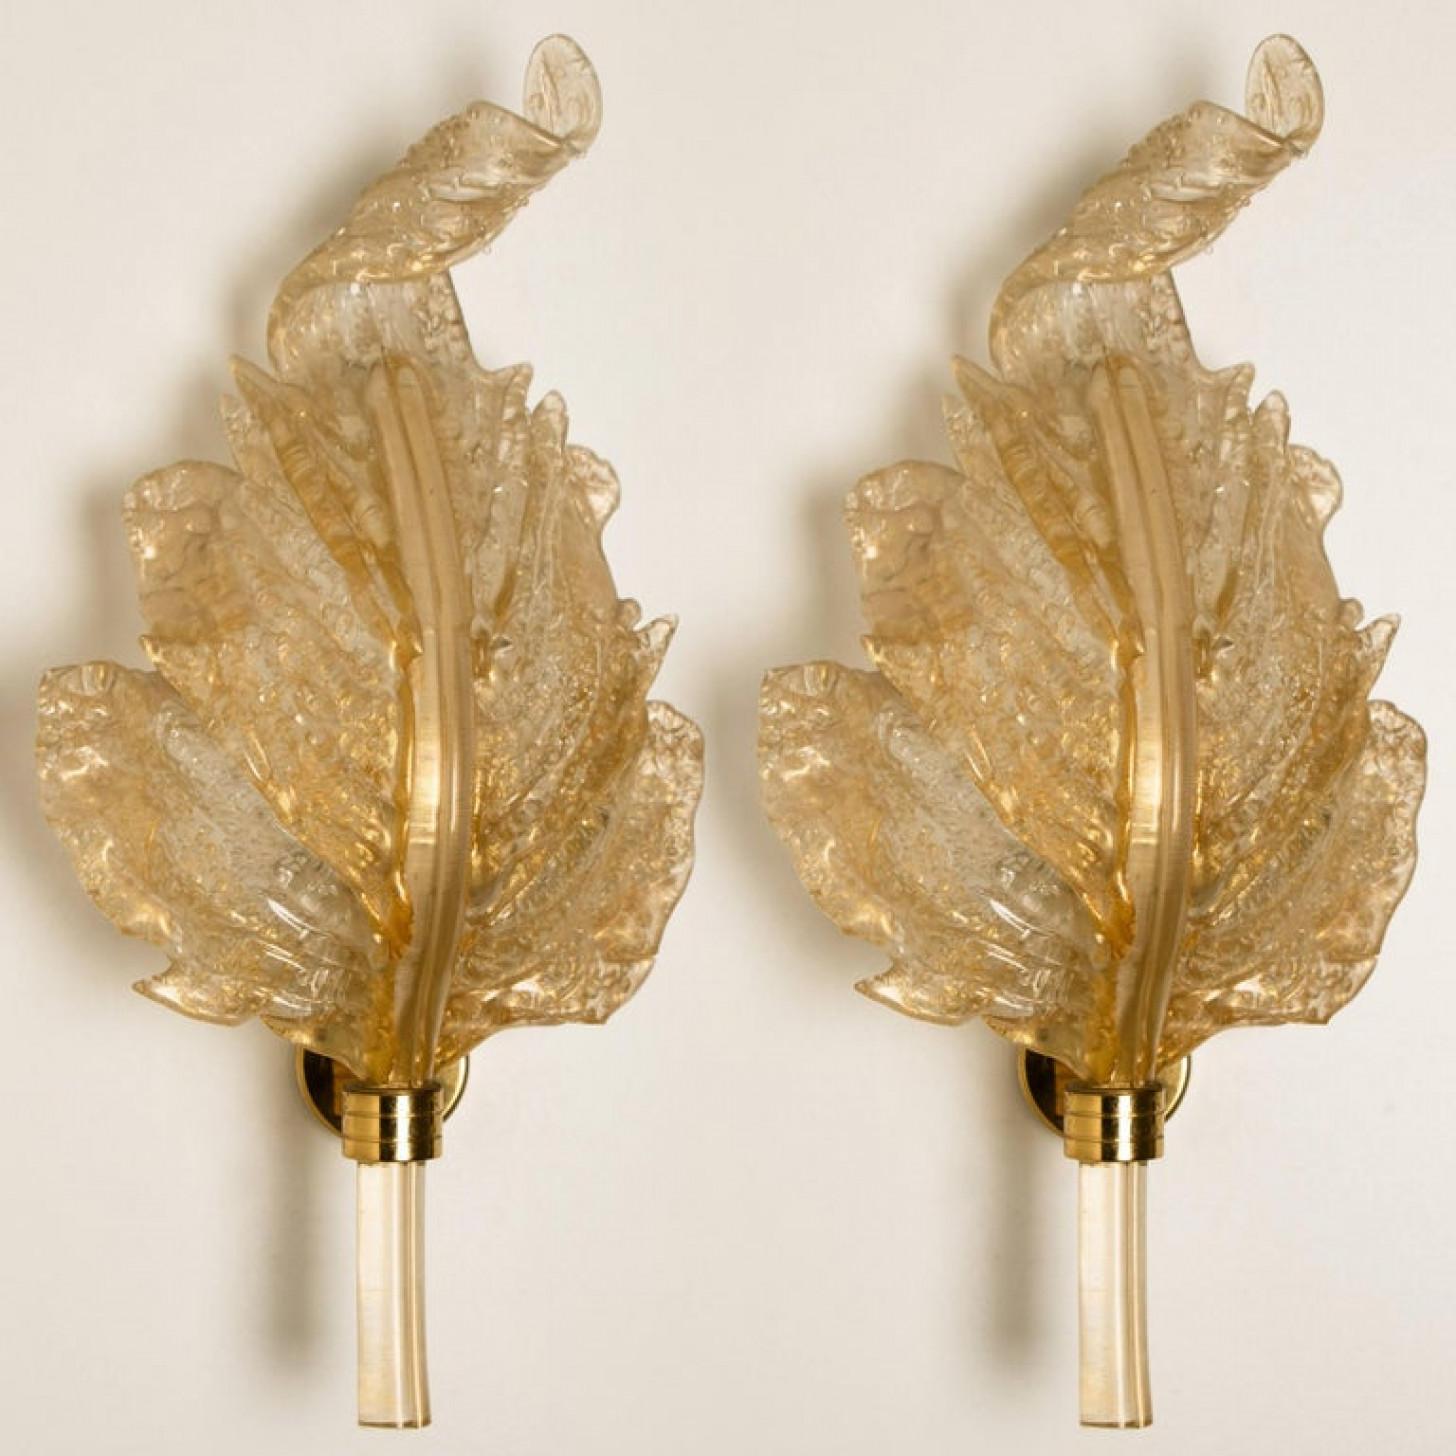 Pair of elegant and exquisite hand blown murano glass Barovier & Toso wall sconces with special gold inclusions. Each light fixture consists one blown murano glass leave. Mounted on a brass frame. The leaves refract light beautifully. The flush